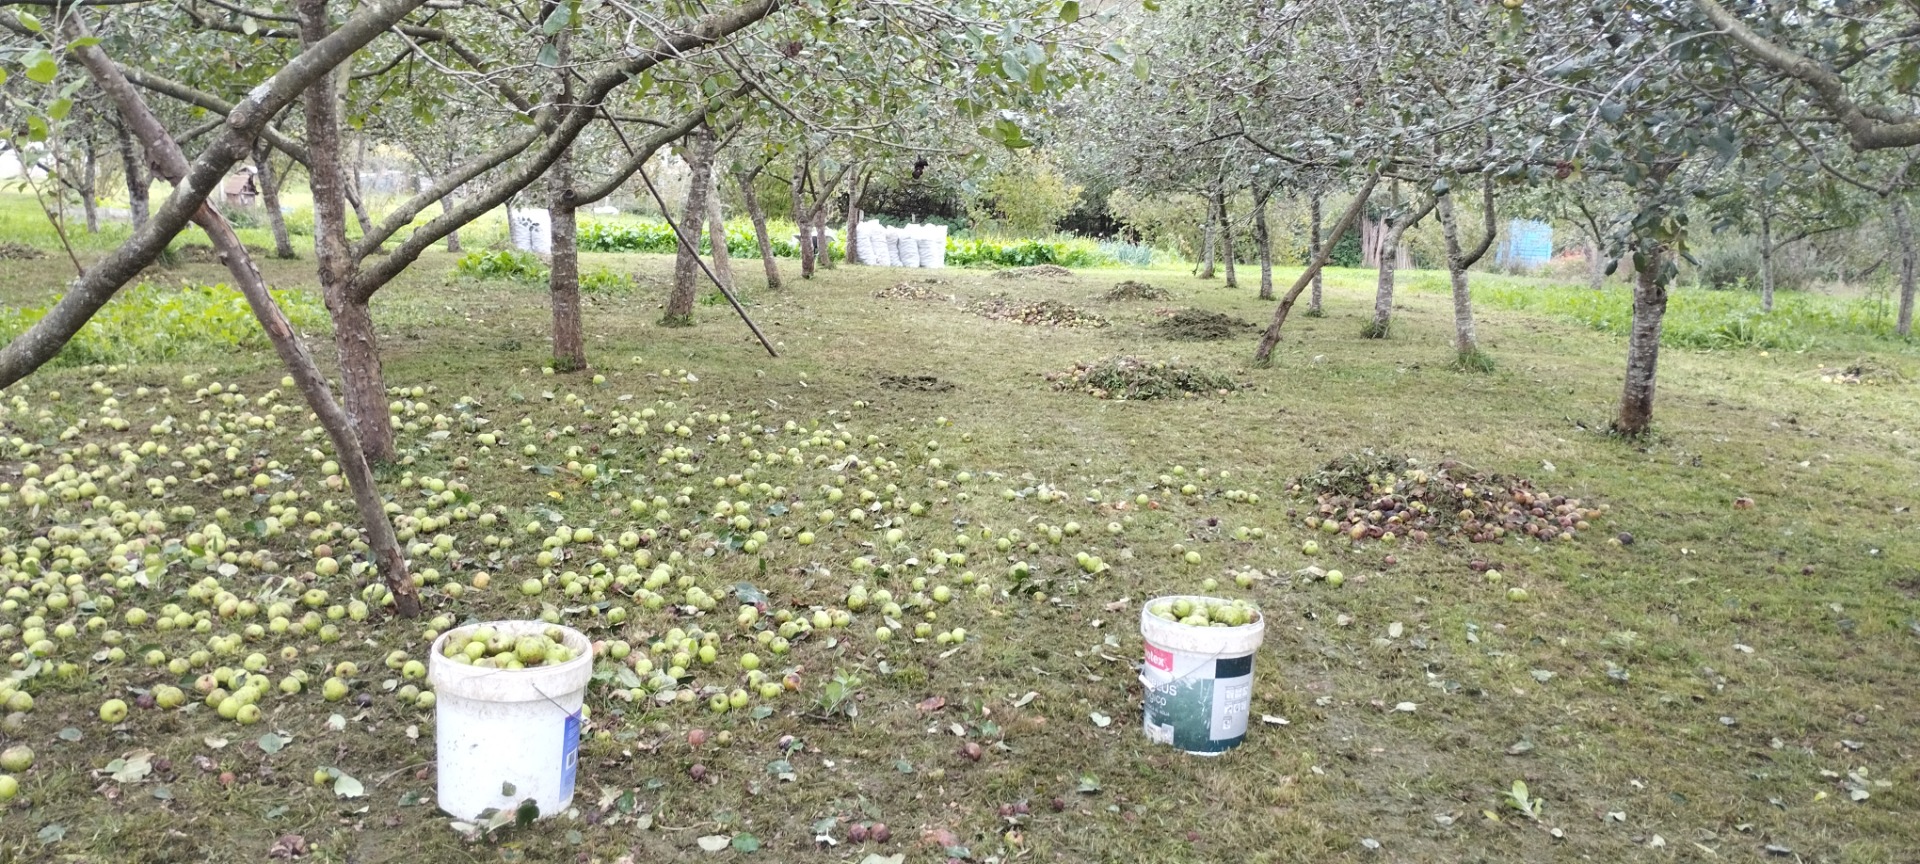  Field with various fruits and trees